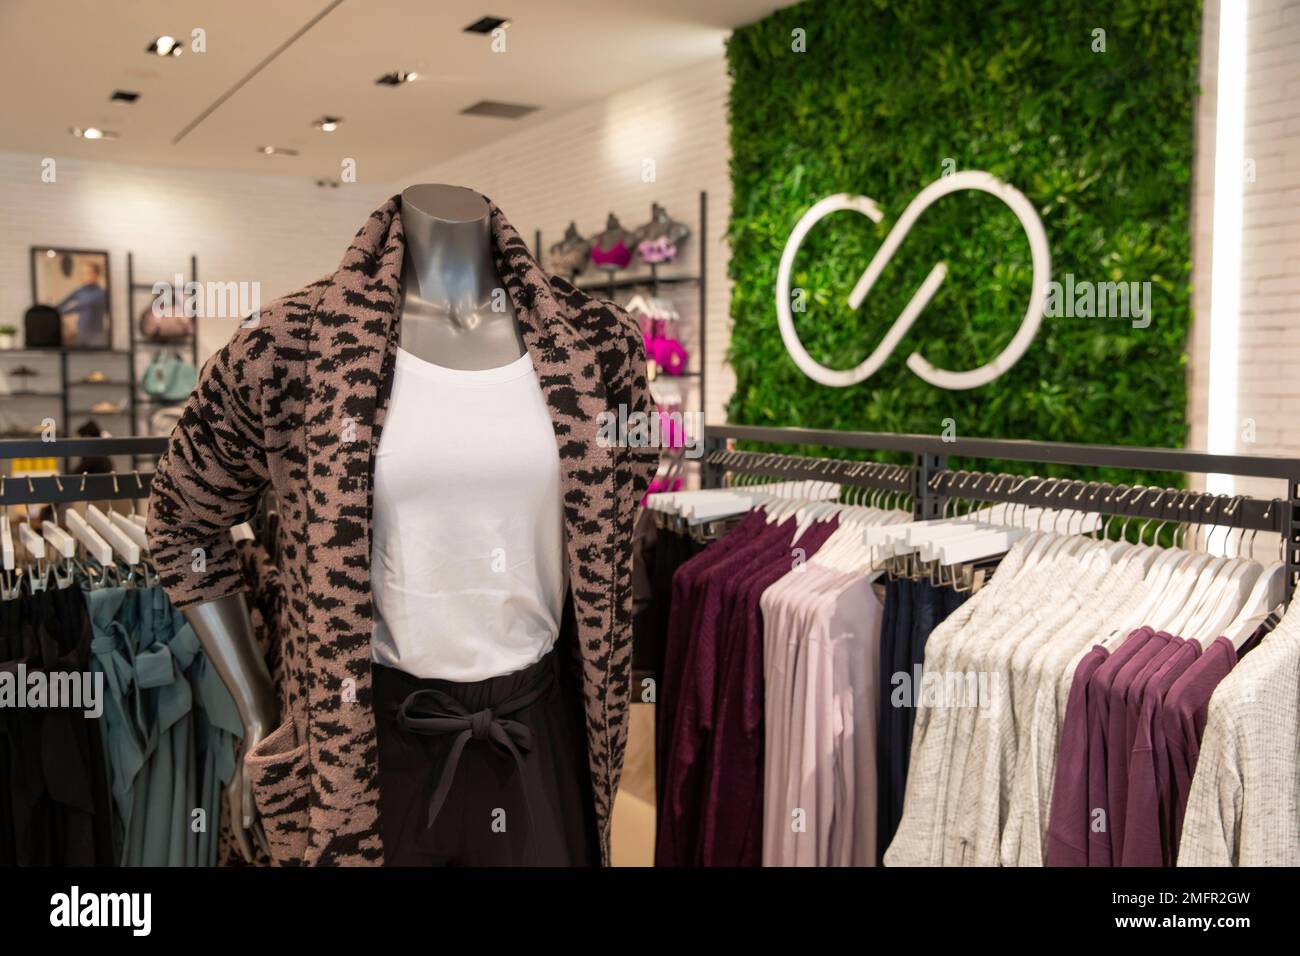 https://c8.alamy.com/comp/2MFR2GW/image-distributed-for-calia-by-carrie-underwood-dicks-sporting-goods-launches-first-ever-pop-up-shops-for-womens-fitness-brand-calia-by-carrie-underwood-on-october-28-2020-in-santa-monica-calif-jeff-lewisap-images-for-calia-by-carrie-underwood-2MFR2GW.jpg